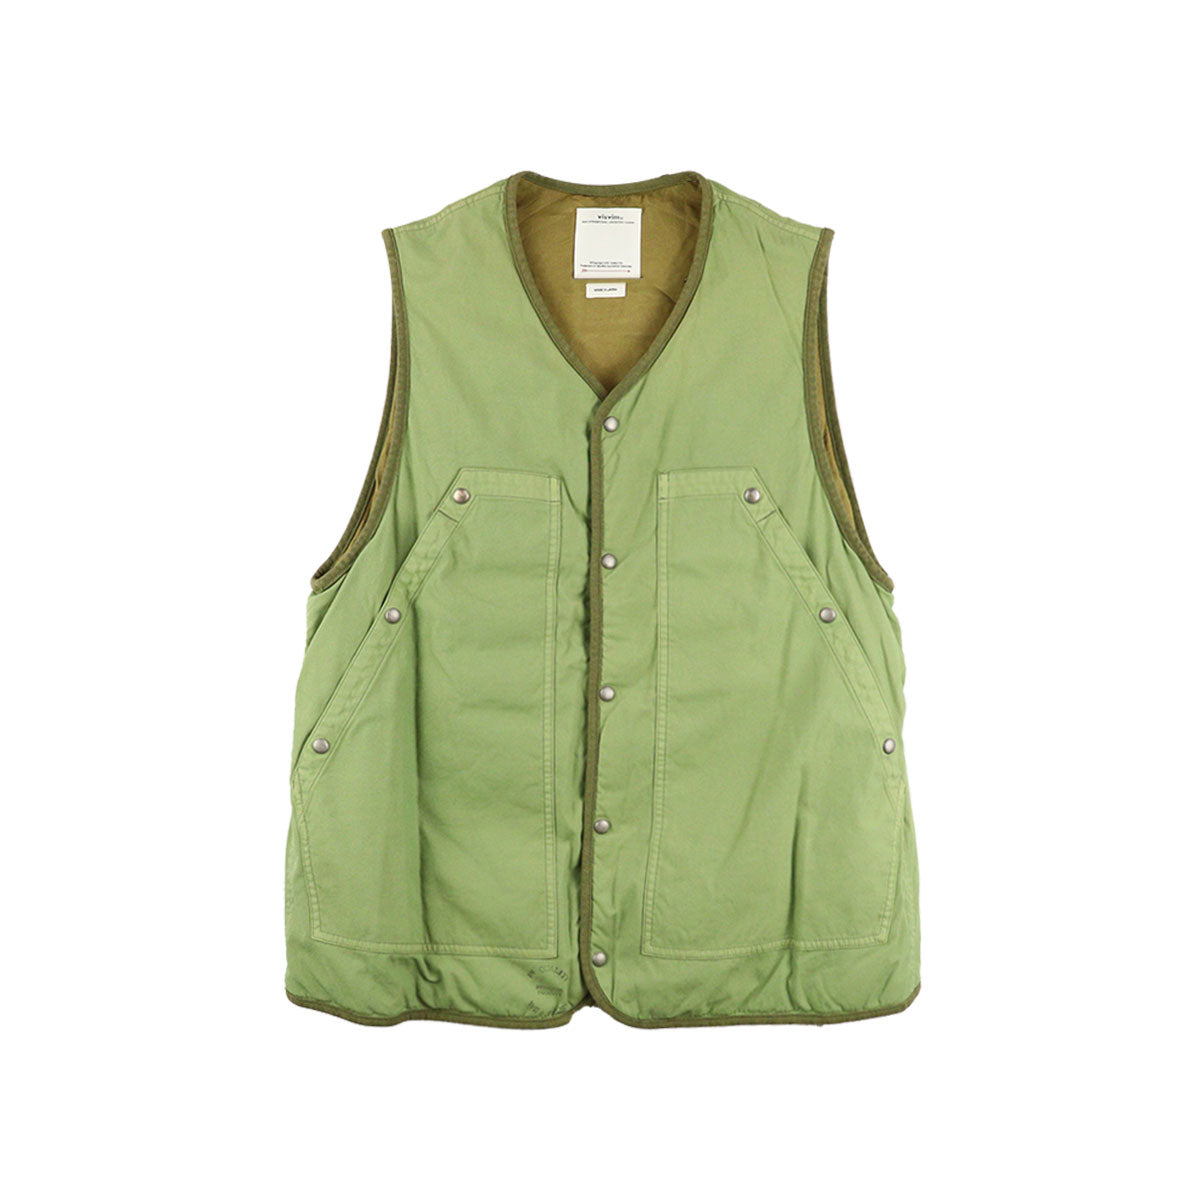 Covey Down Vest – Why are you here?